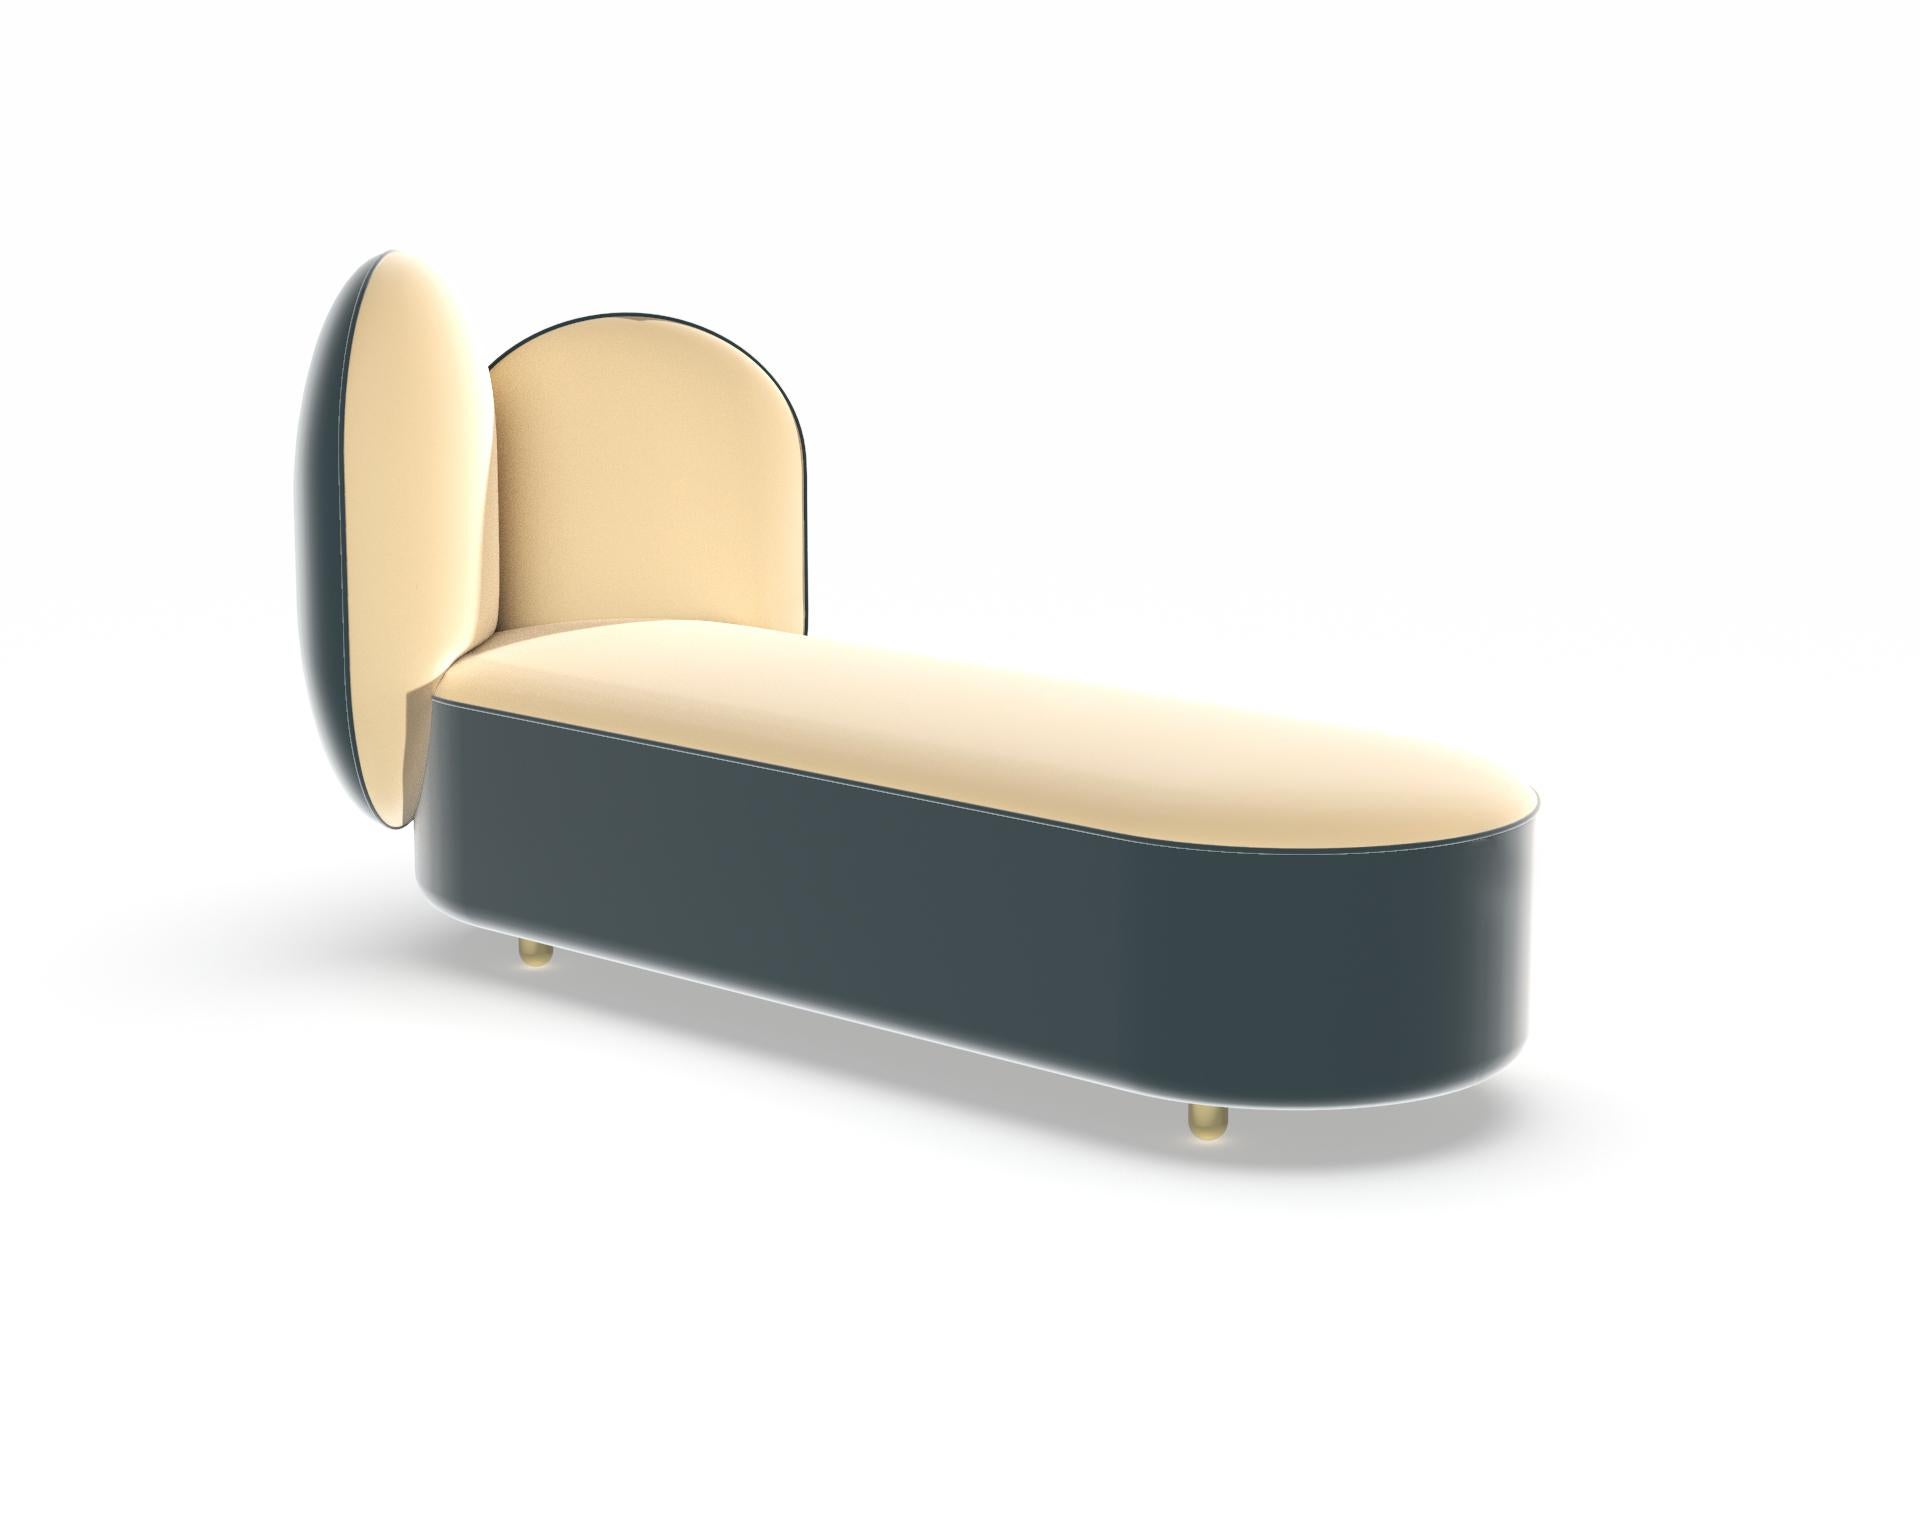 Yiban Yiban daybed designed by Thomas Dariel
Dimensions: D 60 x W 150 x H 90 cm 
Materials: Structure in solid timber and plywood, memory foam base, and seating fully upholstered in fabric, feet in plated metal glossy.
Available in different fabrics